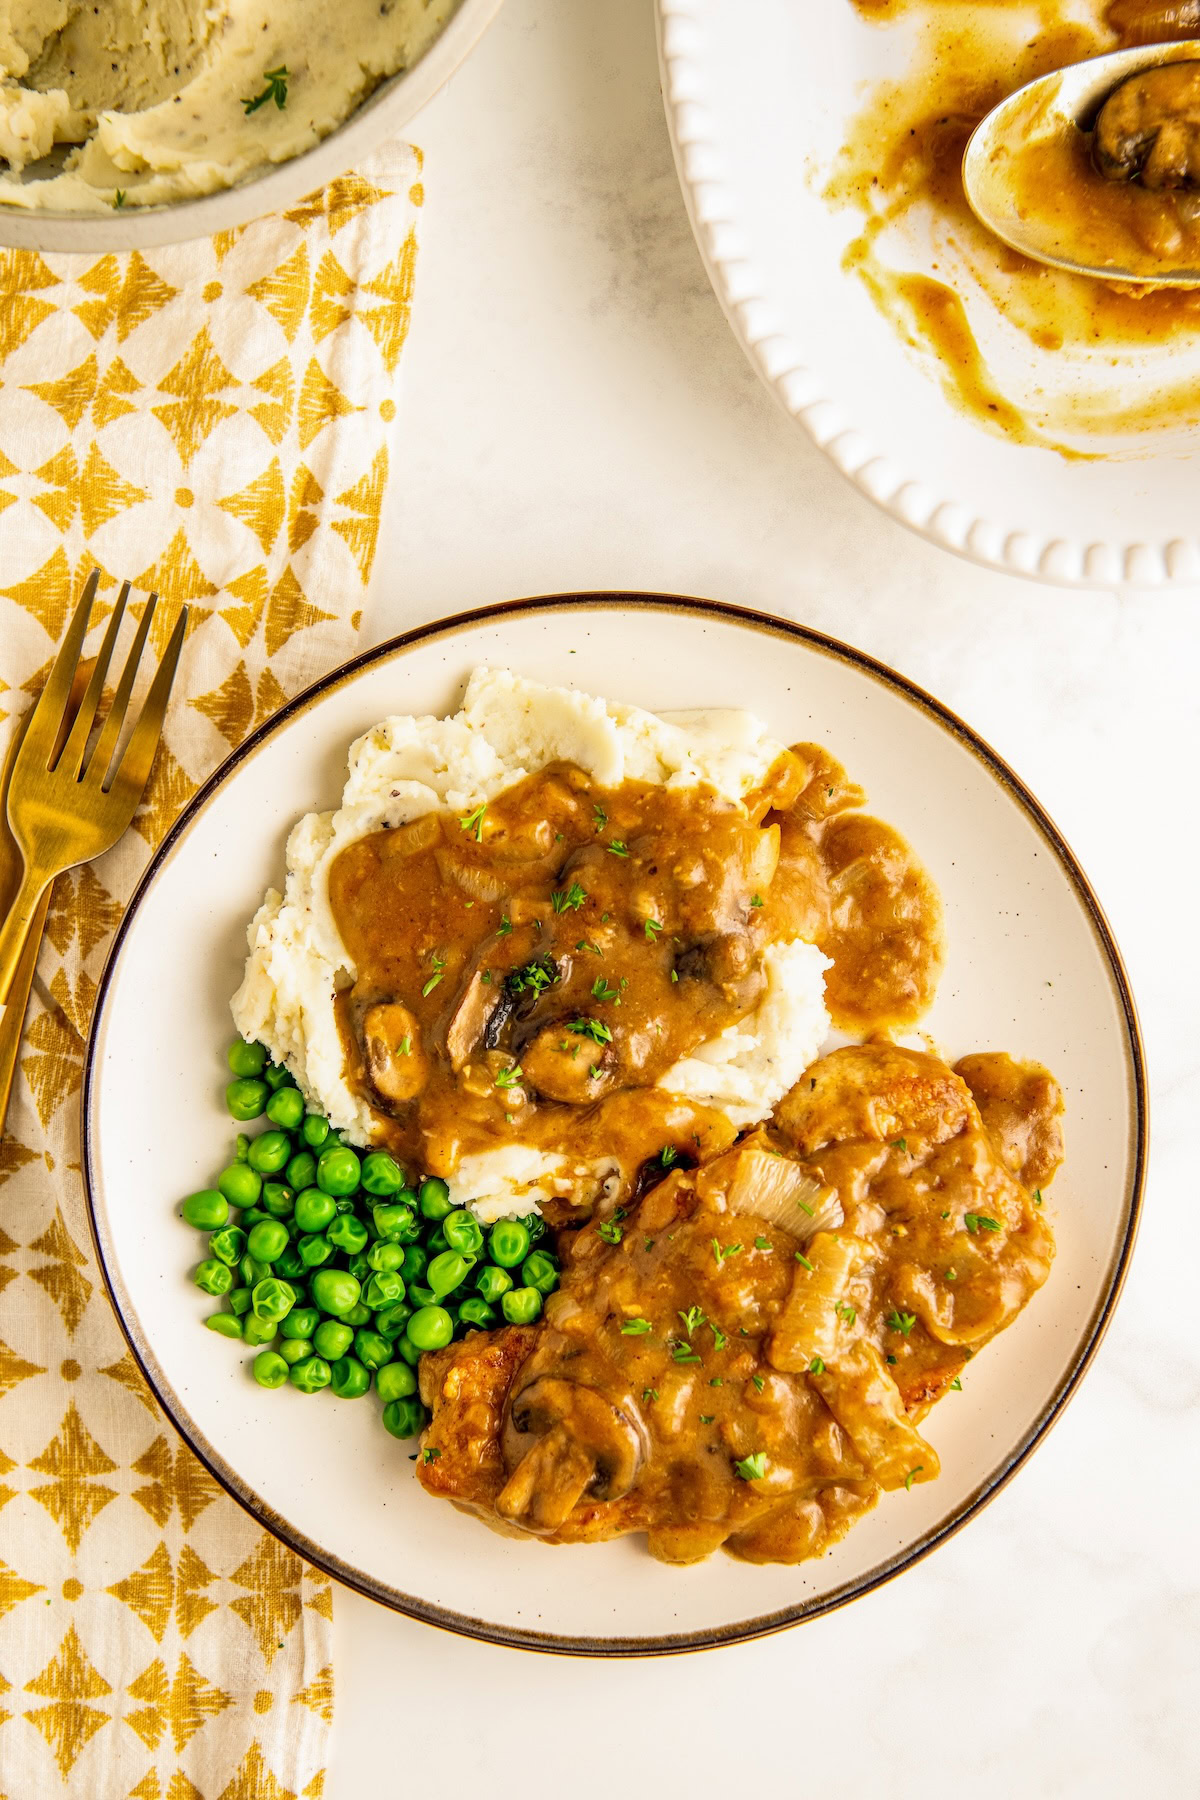 Tender and juicy smothered pork chops in a rich, brown gravy with mushrooms and onions served over mashed potatoes with a side of green peas.